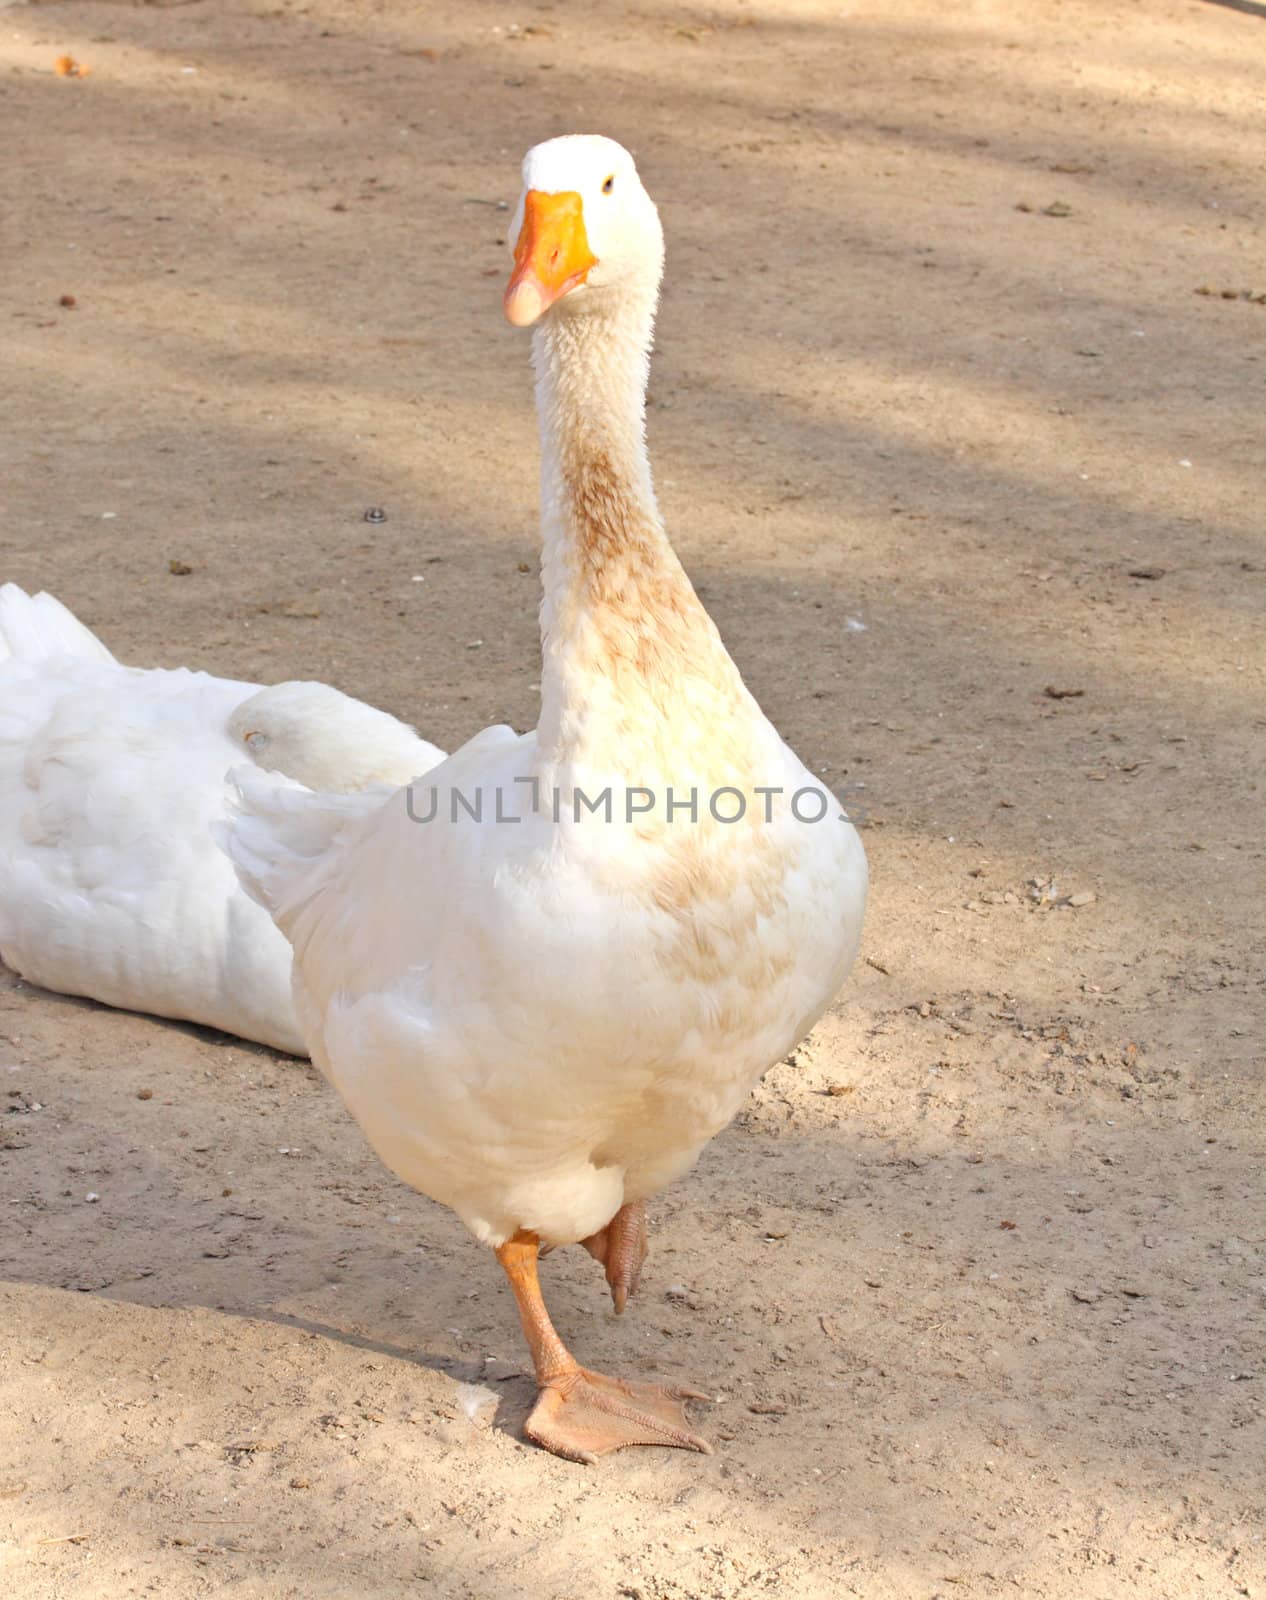 Close up of the white domestic goose